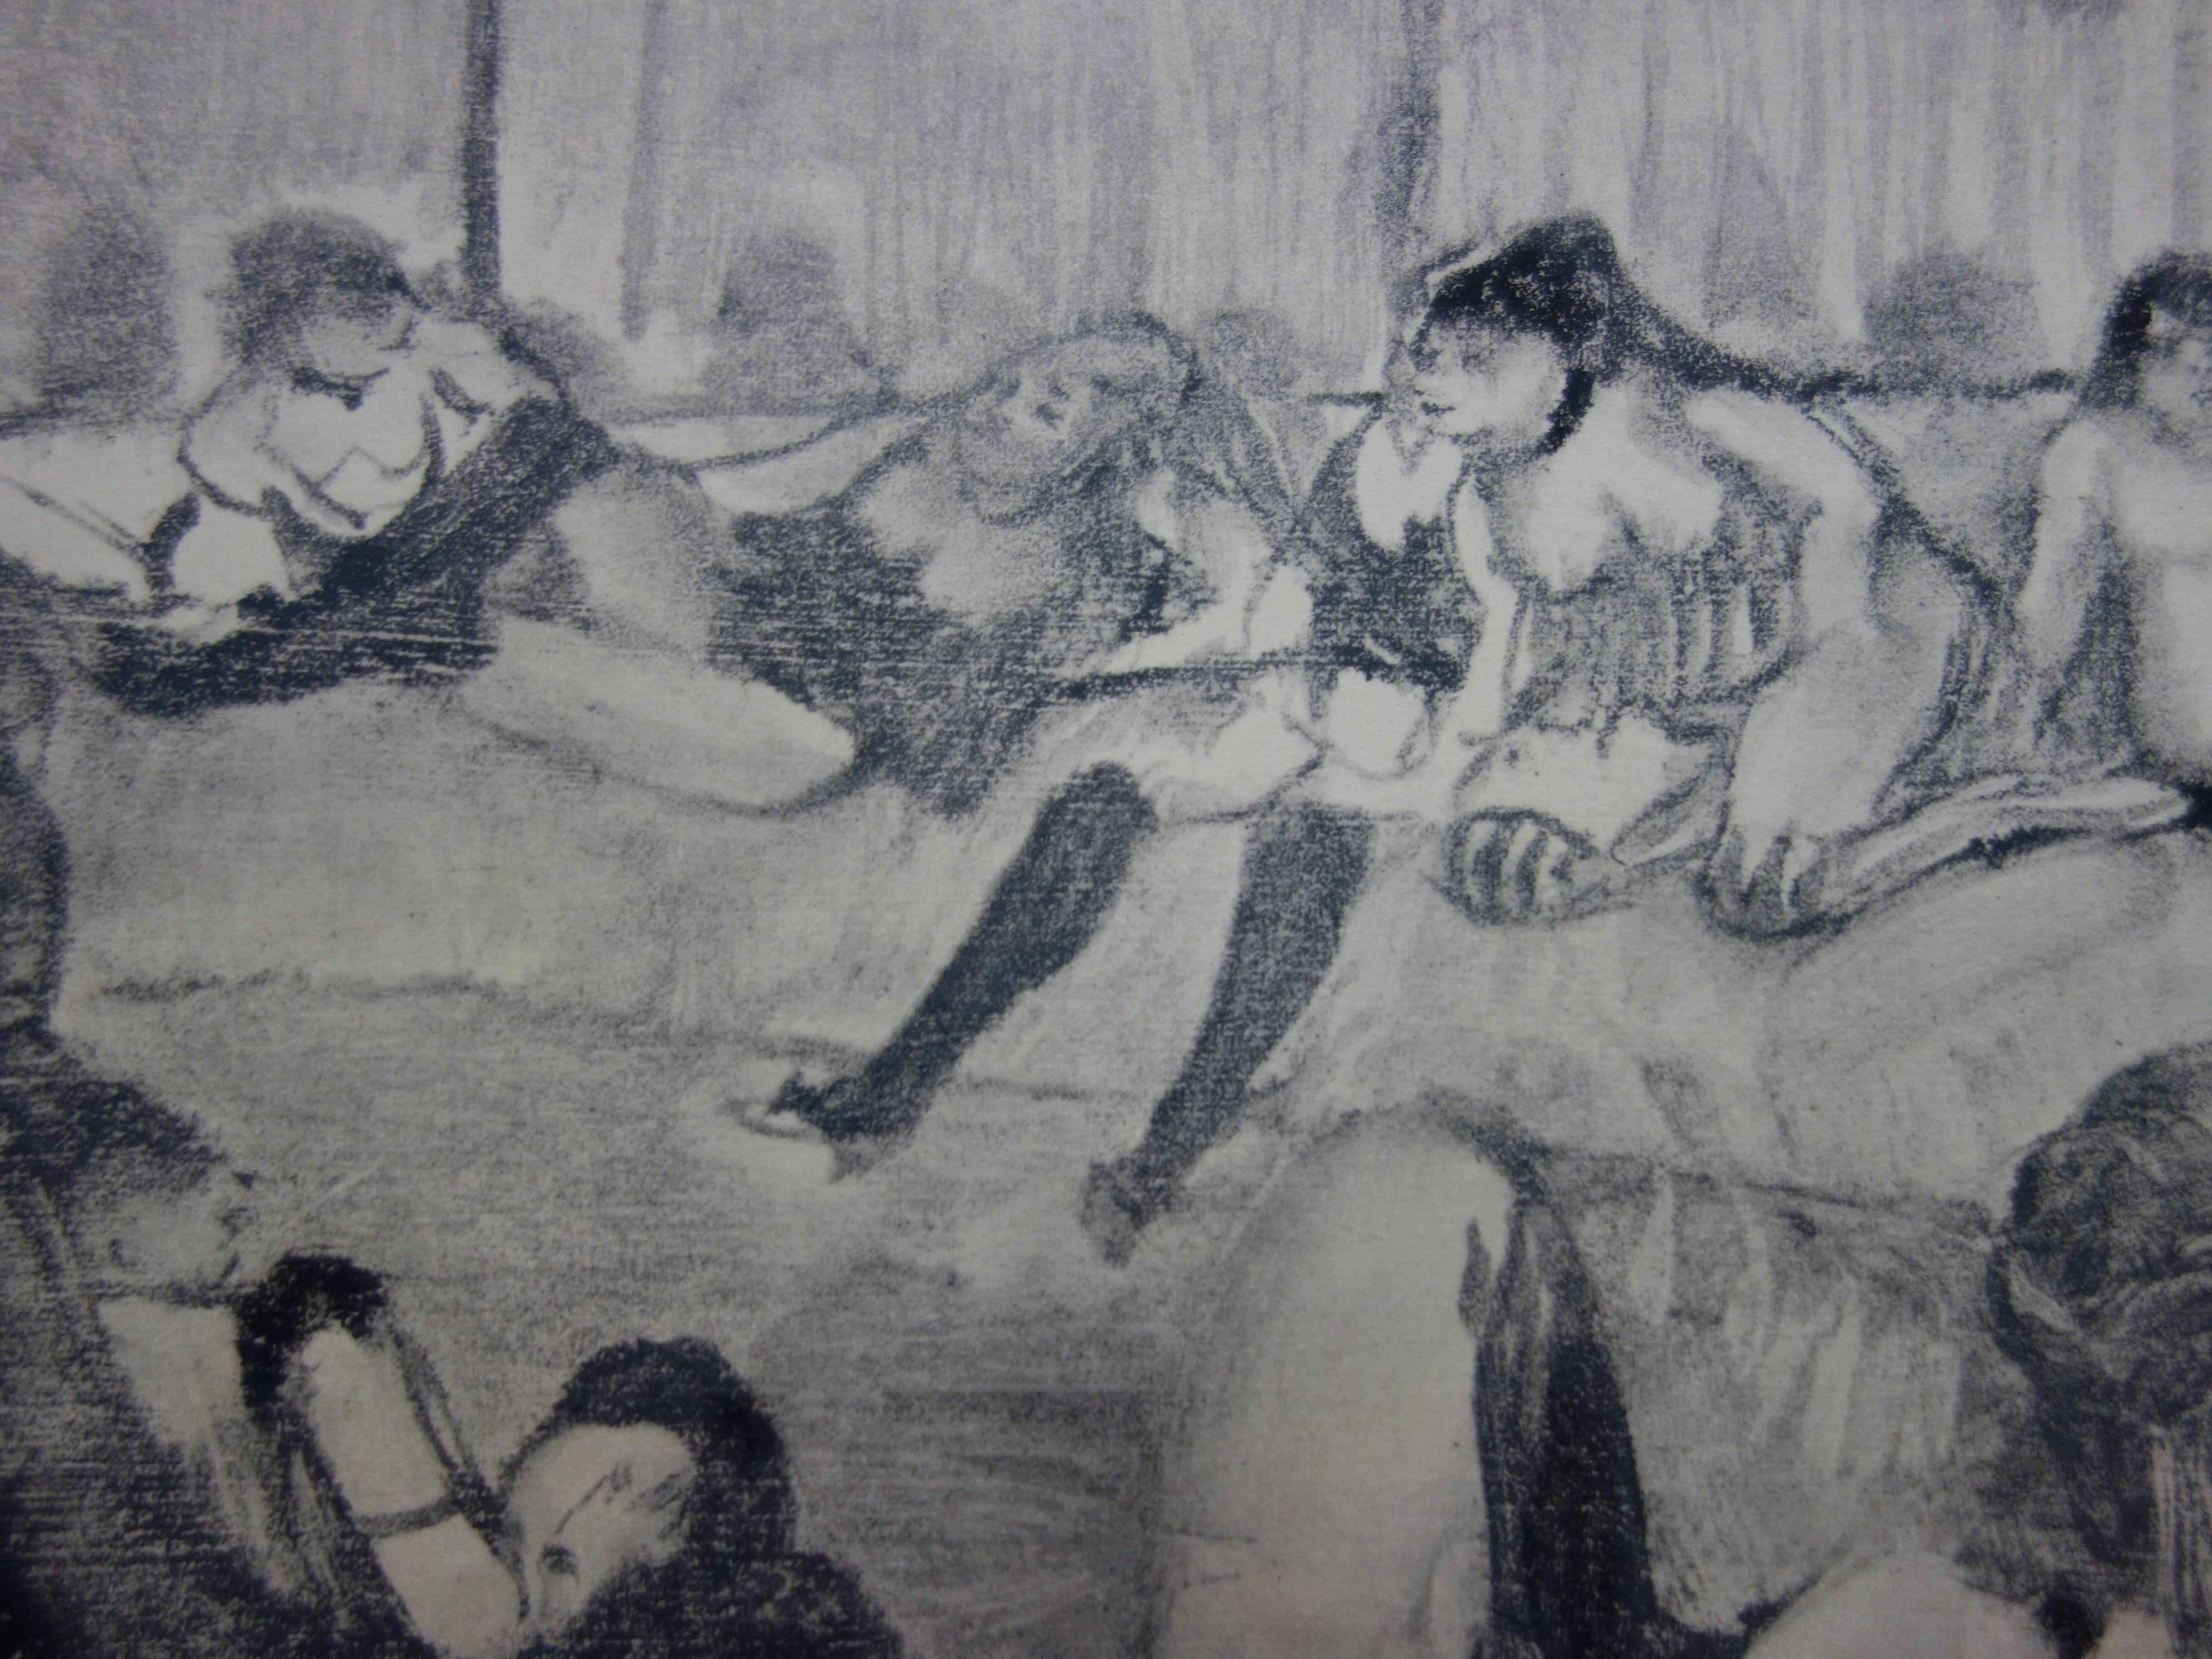 Whorehouse Scene : Briefing with Madam Mother - Etching, 1935 - Modern Print by (after) Edgar Degas